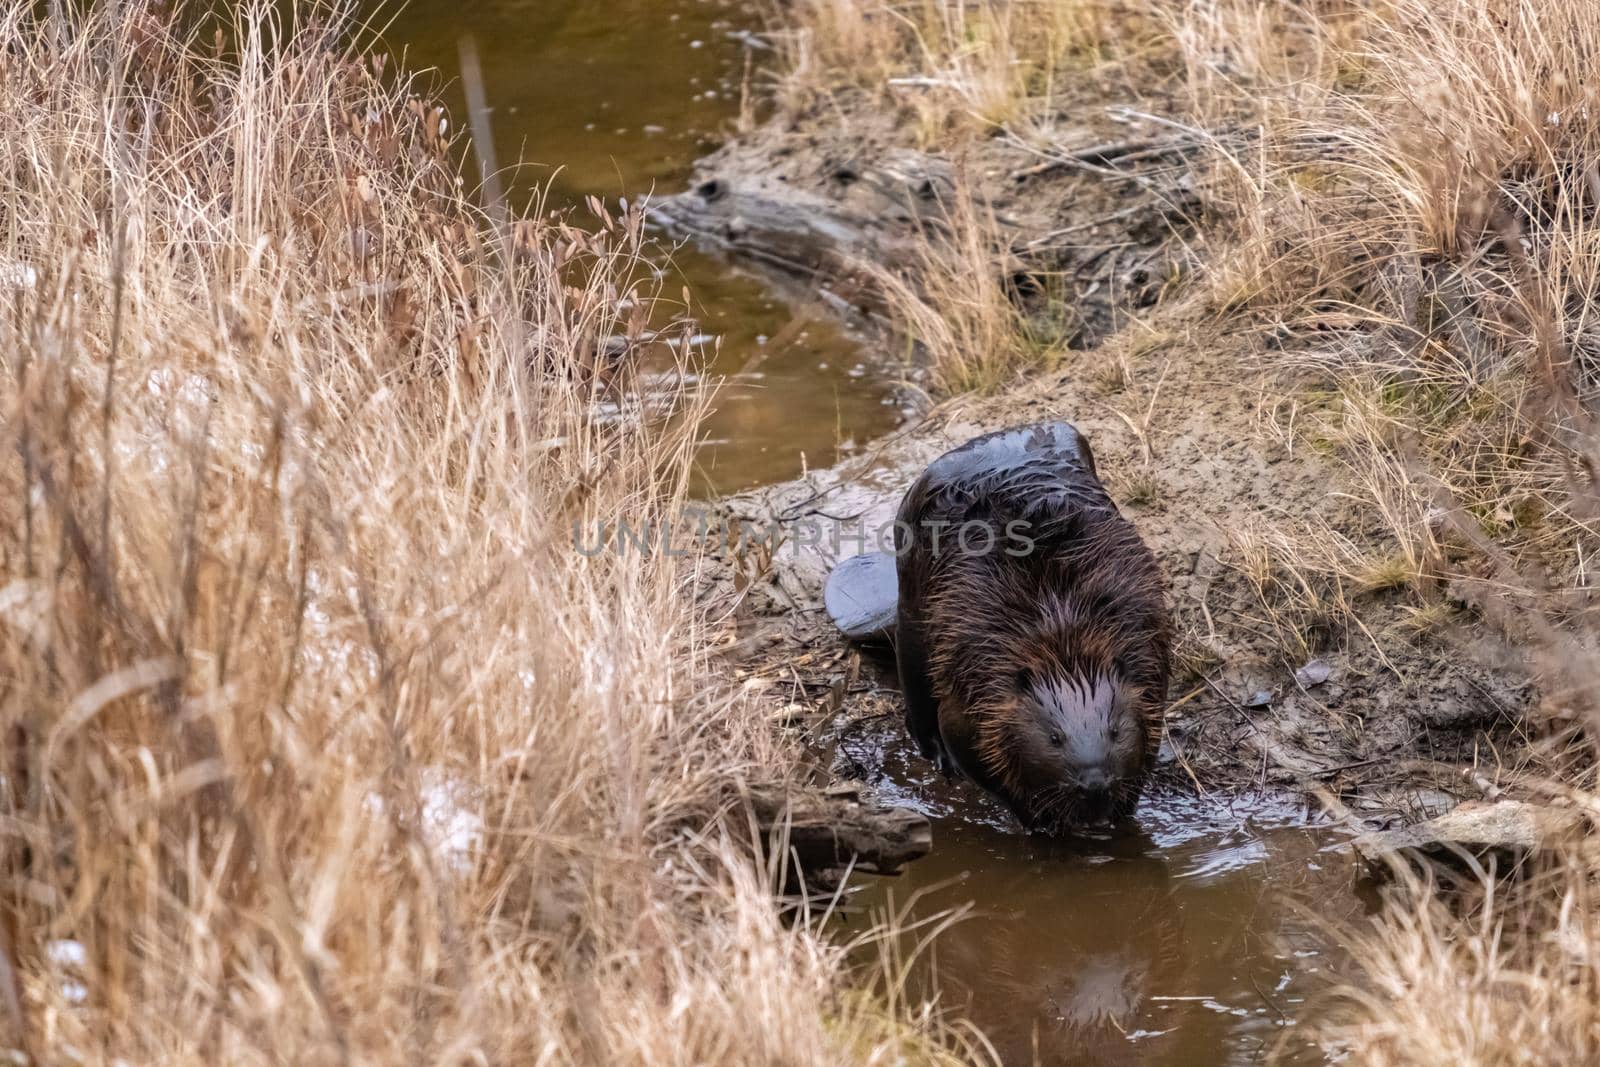 A Canadian beaver approaches a puddle of water, which reflects its face, as it walks through mud leaving a beaver pond.